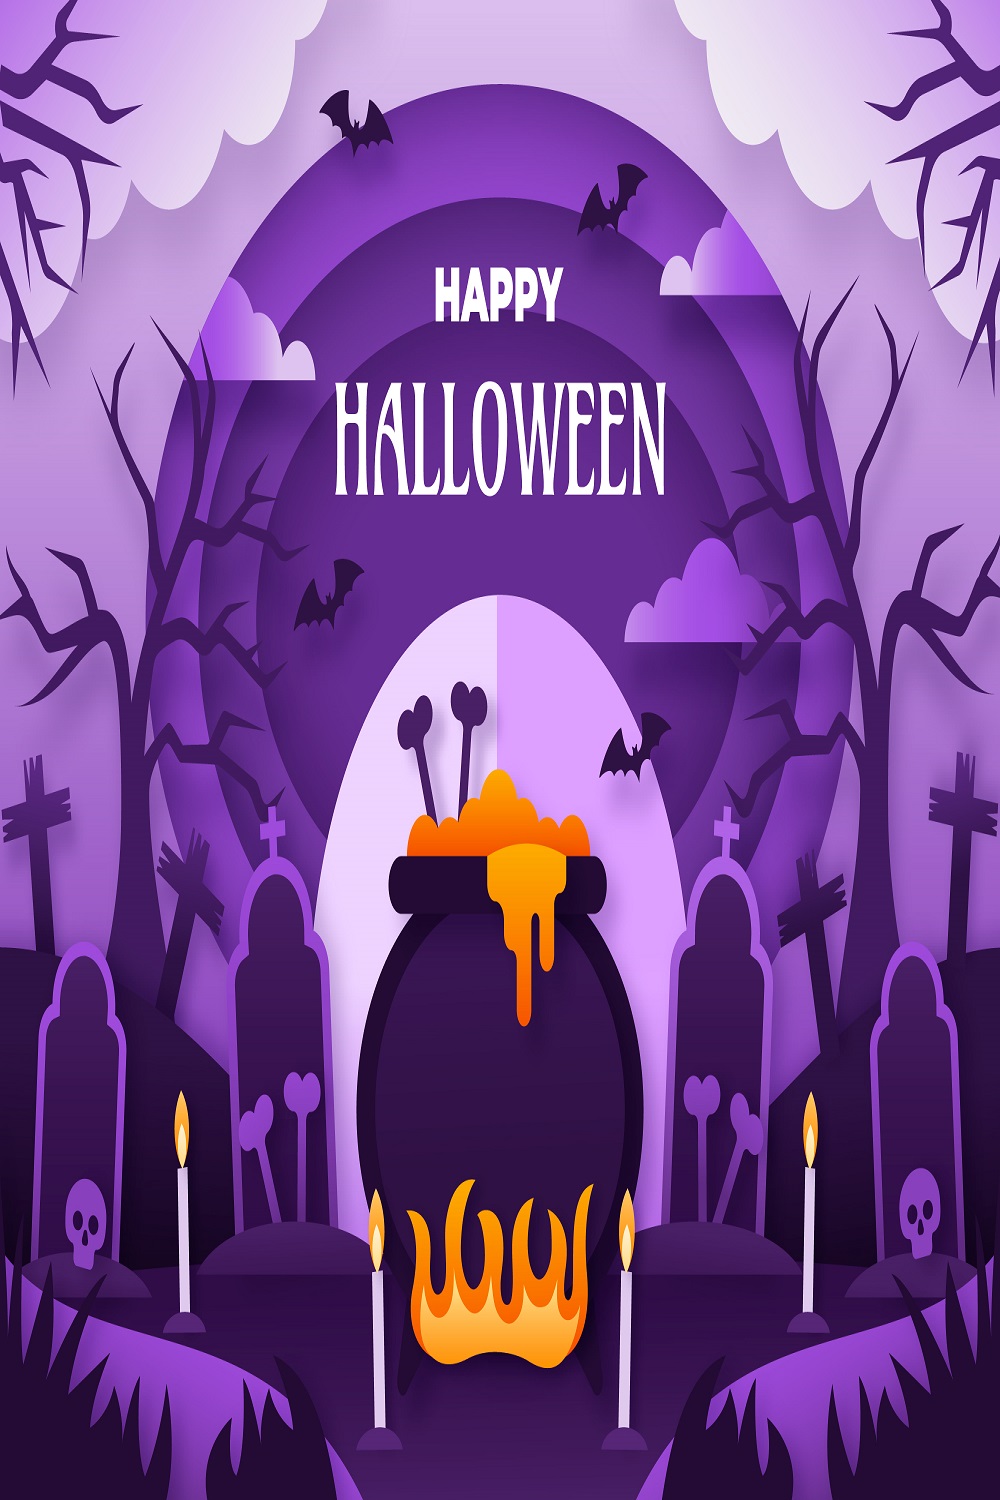 Halloween celebration paper style background pinterest preview image.